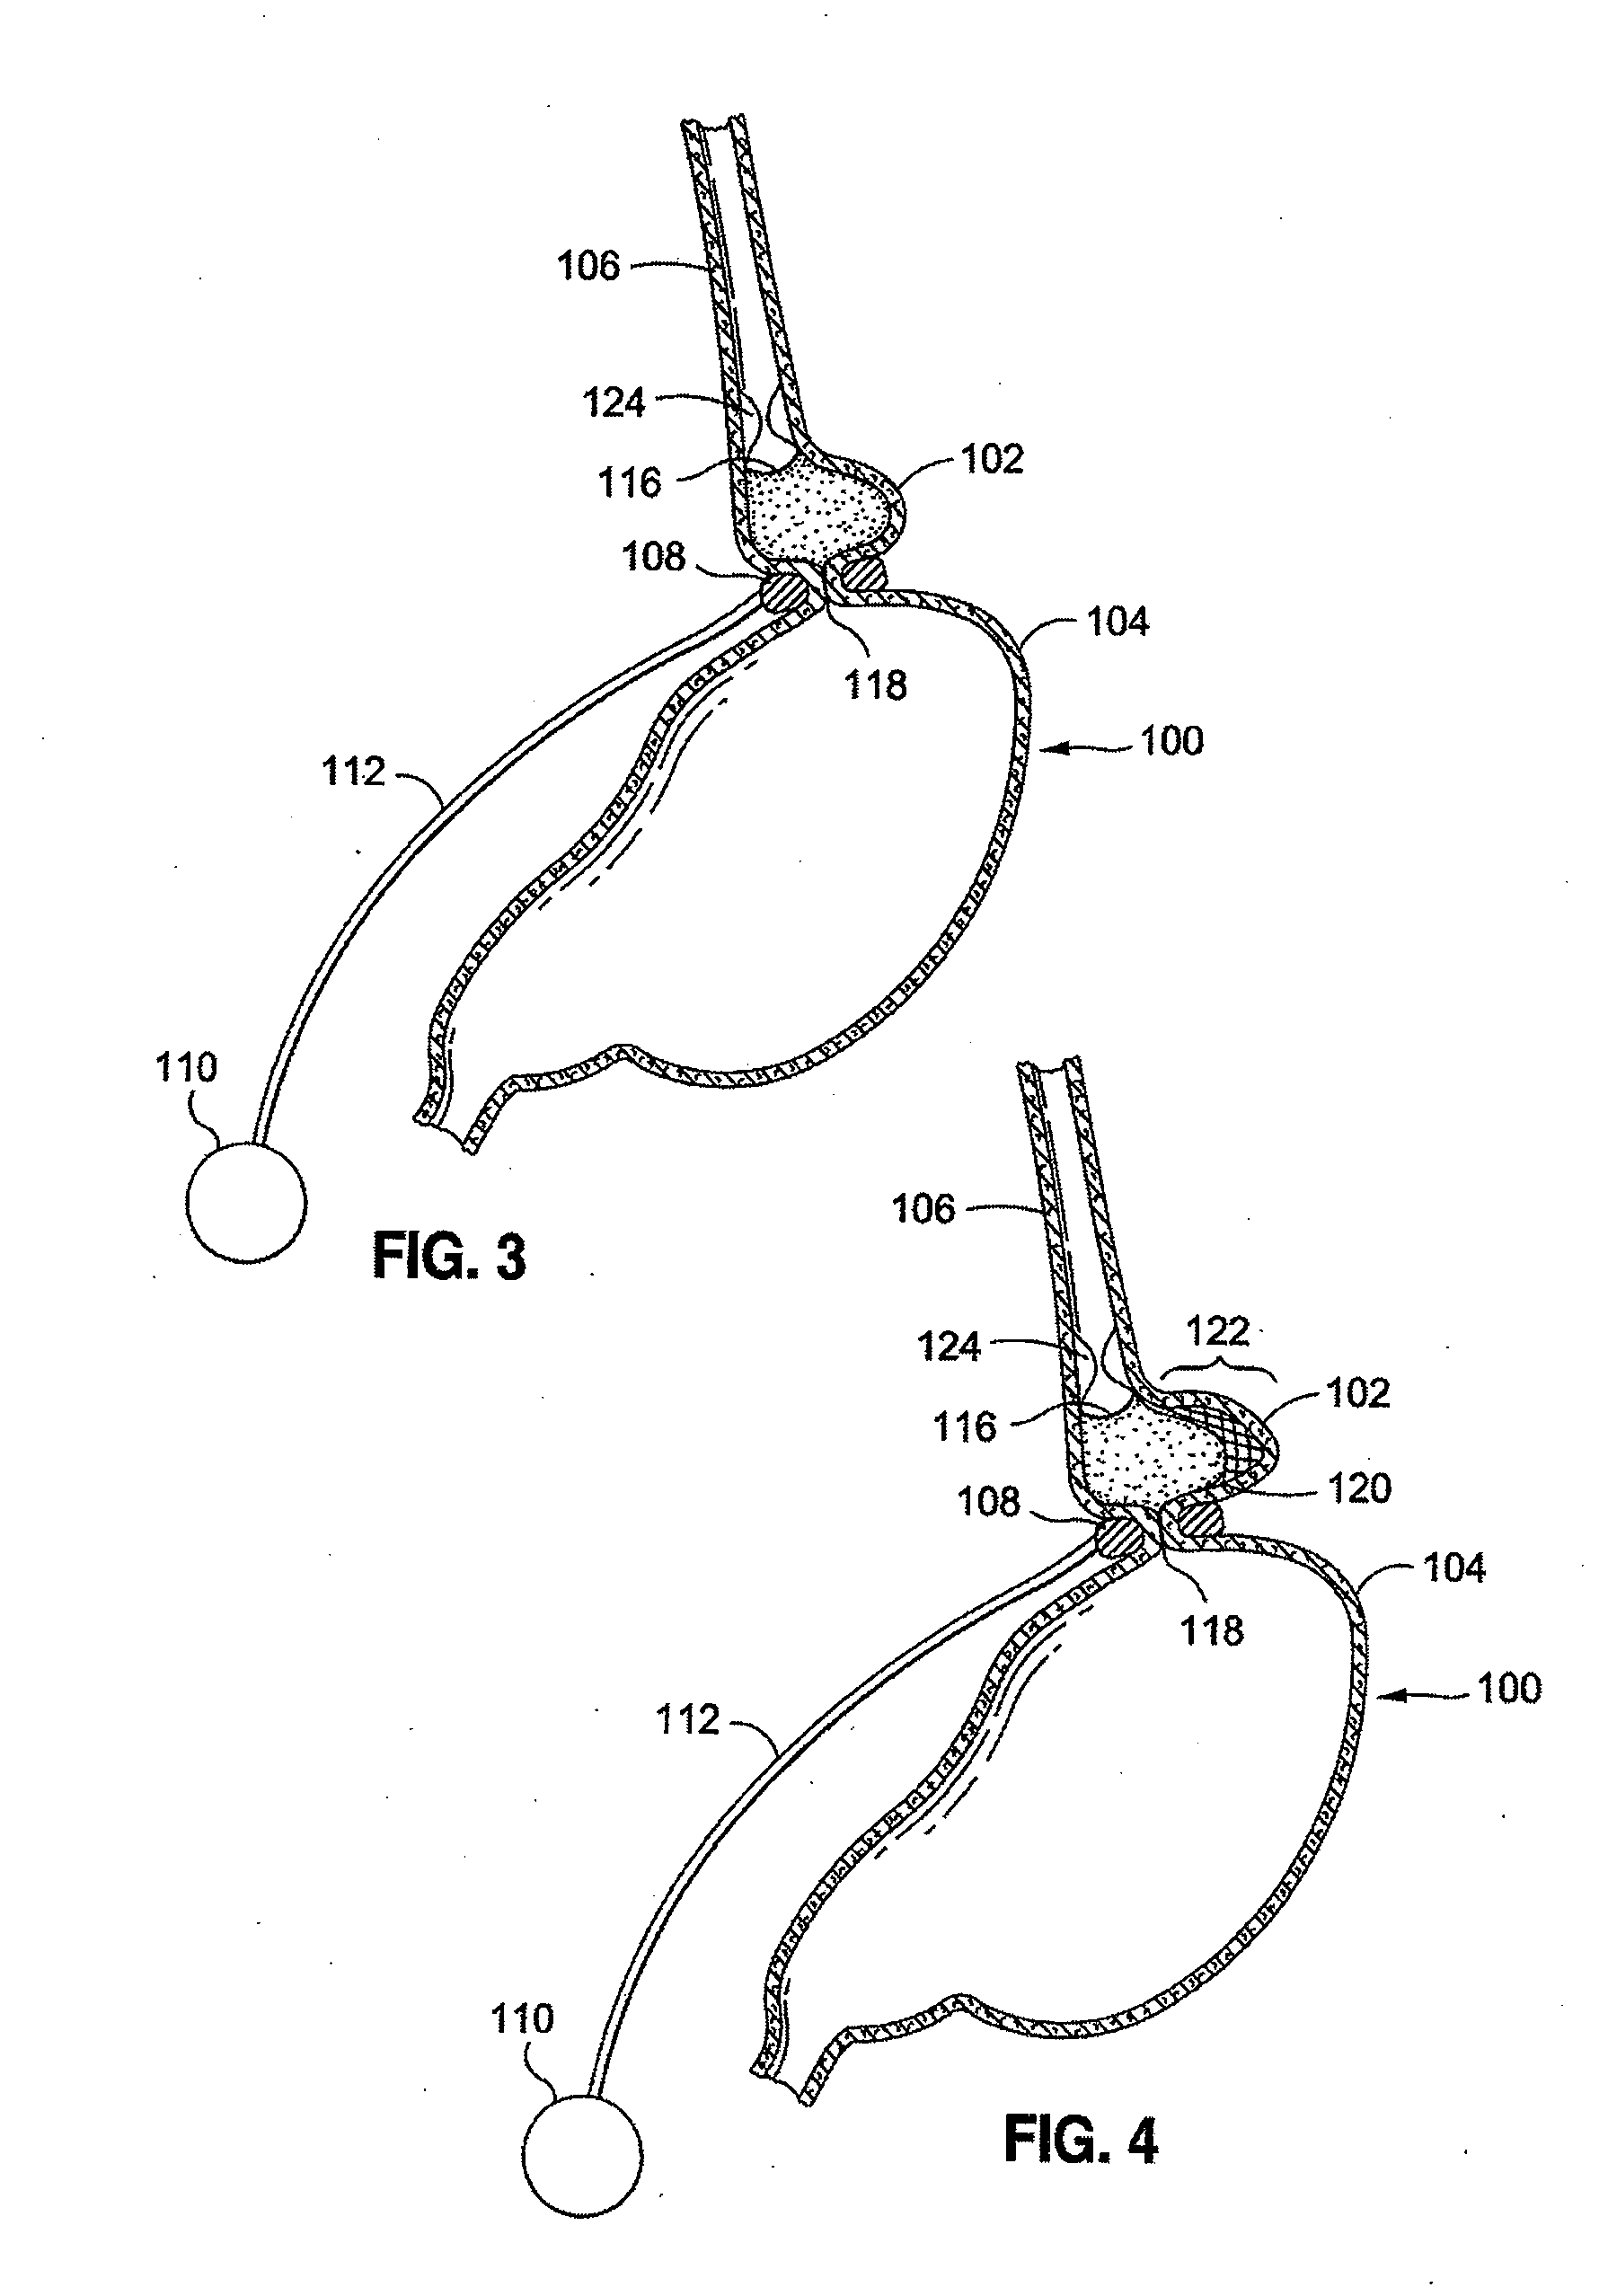 External sensing systems and methods for gastric restriction devices